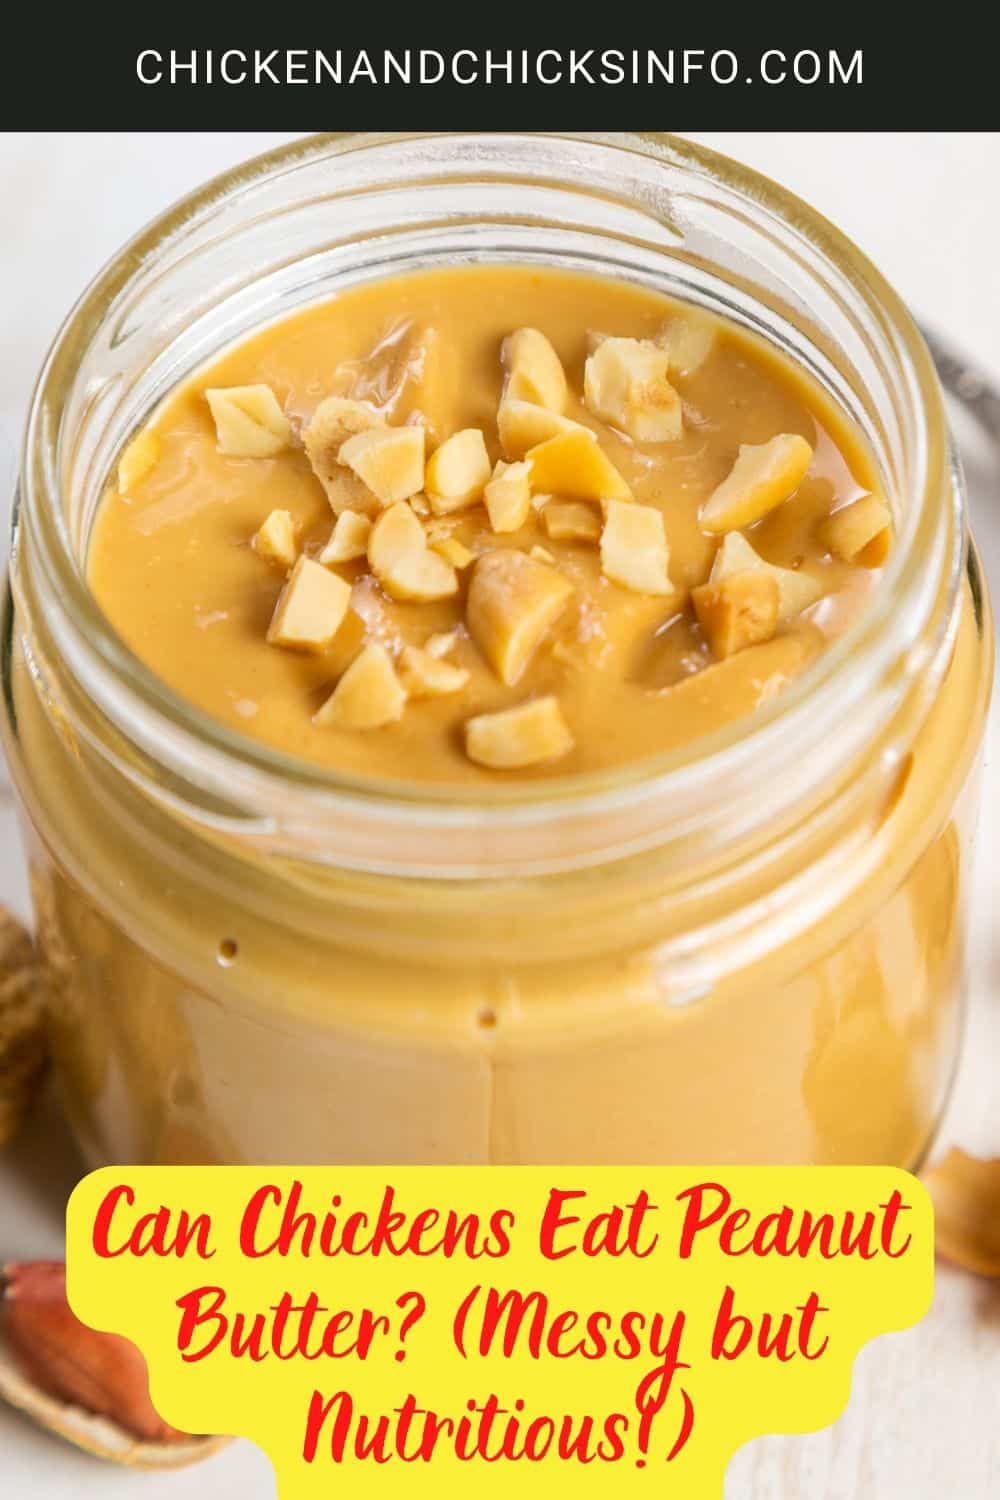 Can Chickens Eat Peanut Butter? (Messy but Nutritious!) poster.